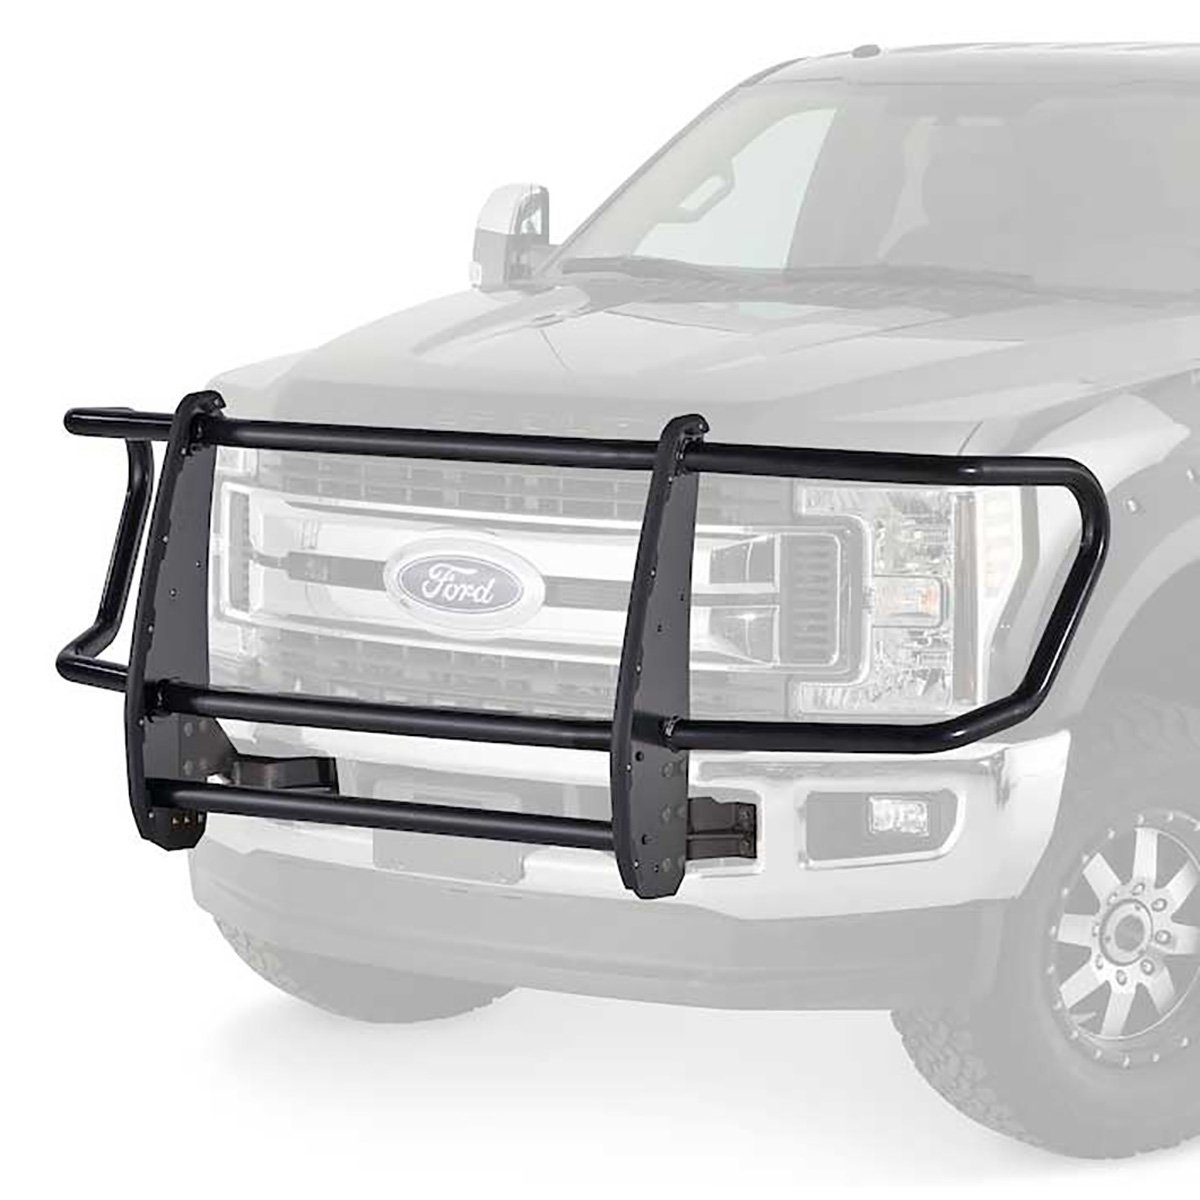 Trans4mer III Full Grille Guard Without Mounts Ford F-Series Super Duty Pickup Trucks